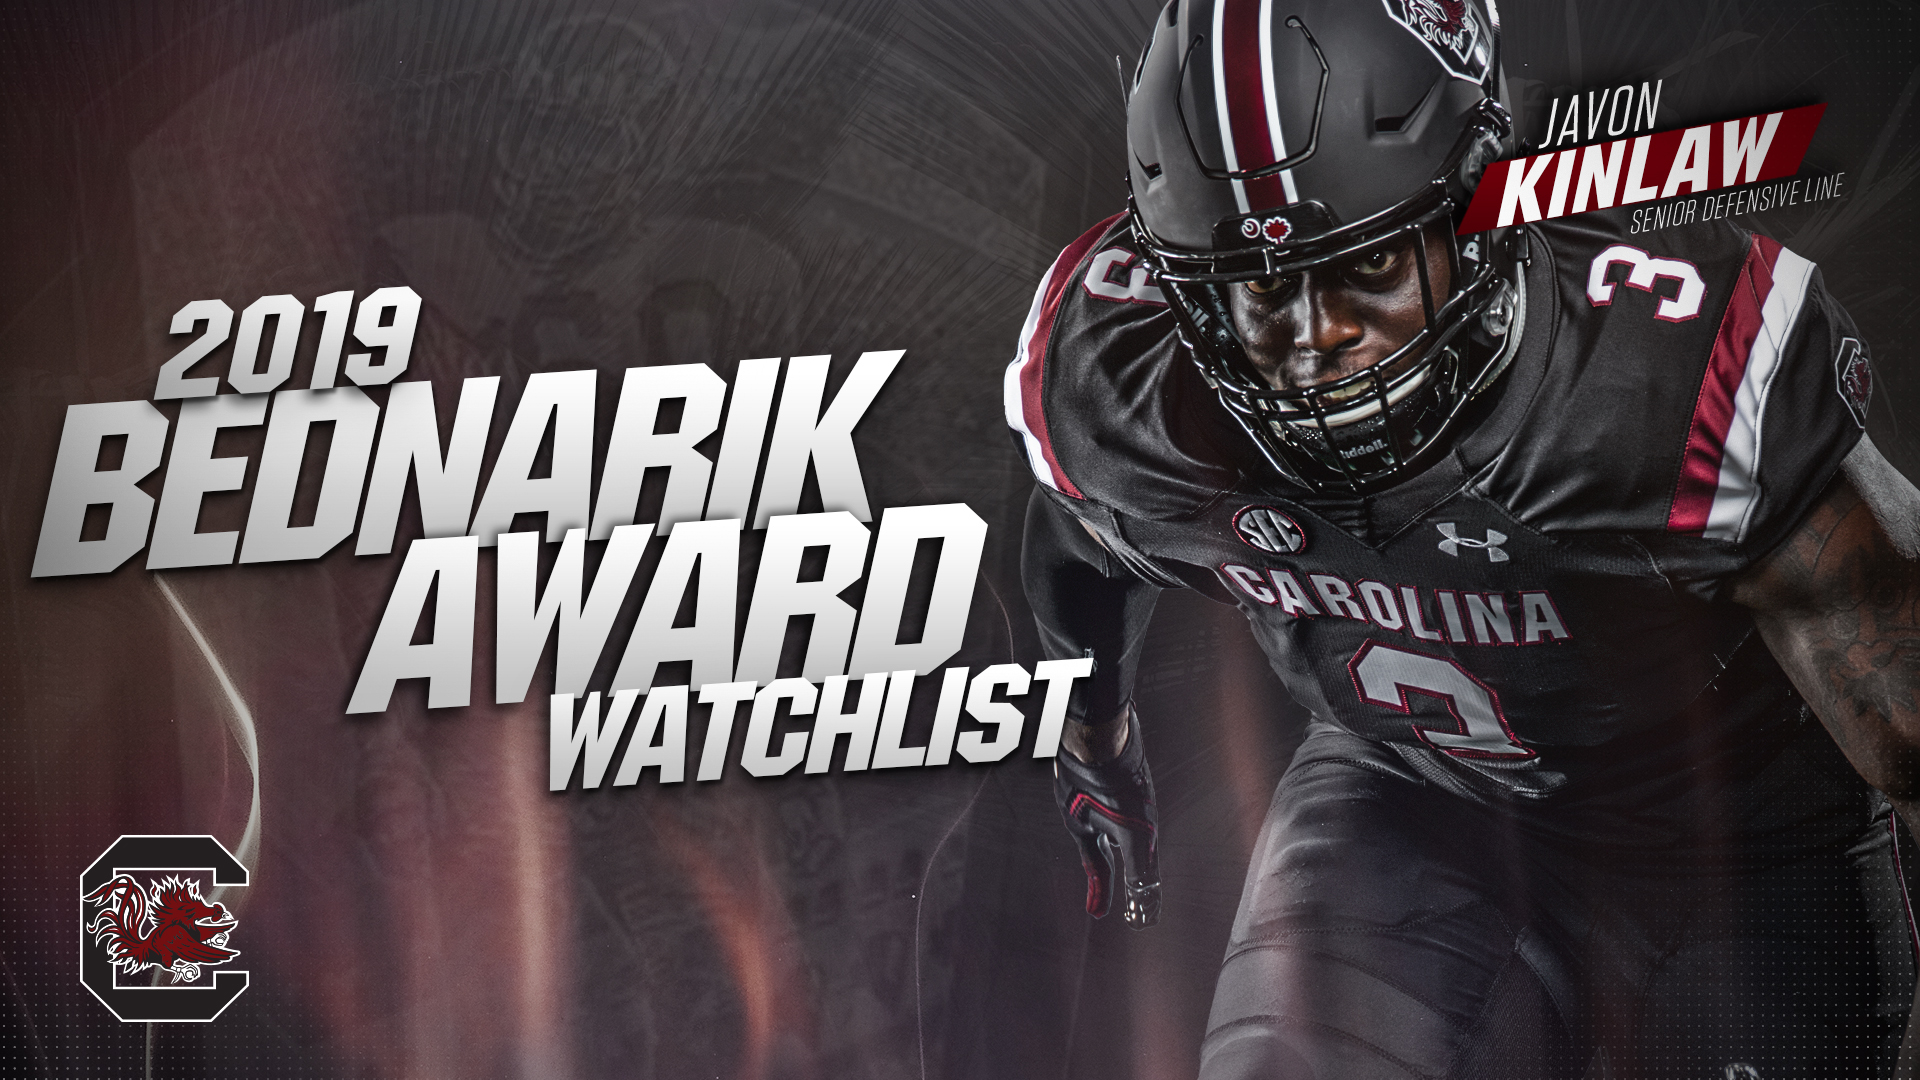 Bentley, Kinlaw Named to First Set of Watch Lists